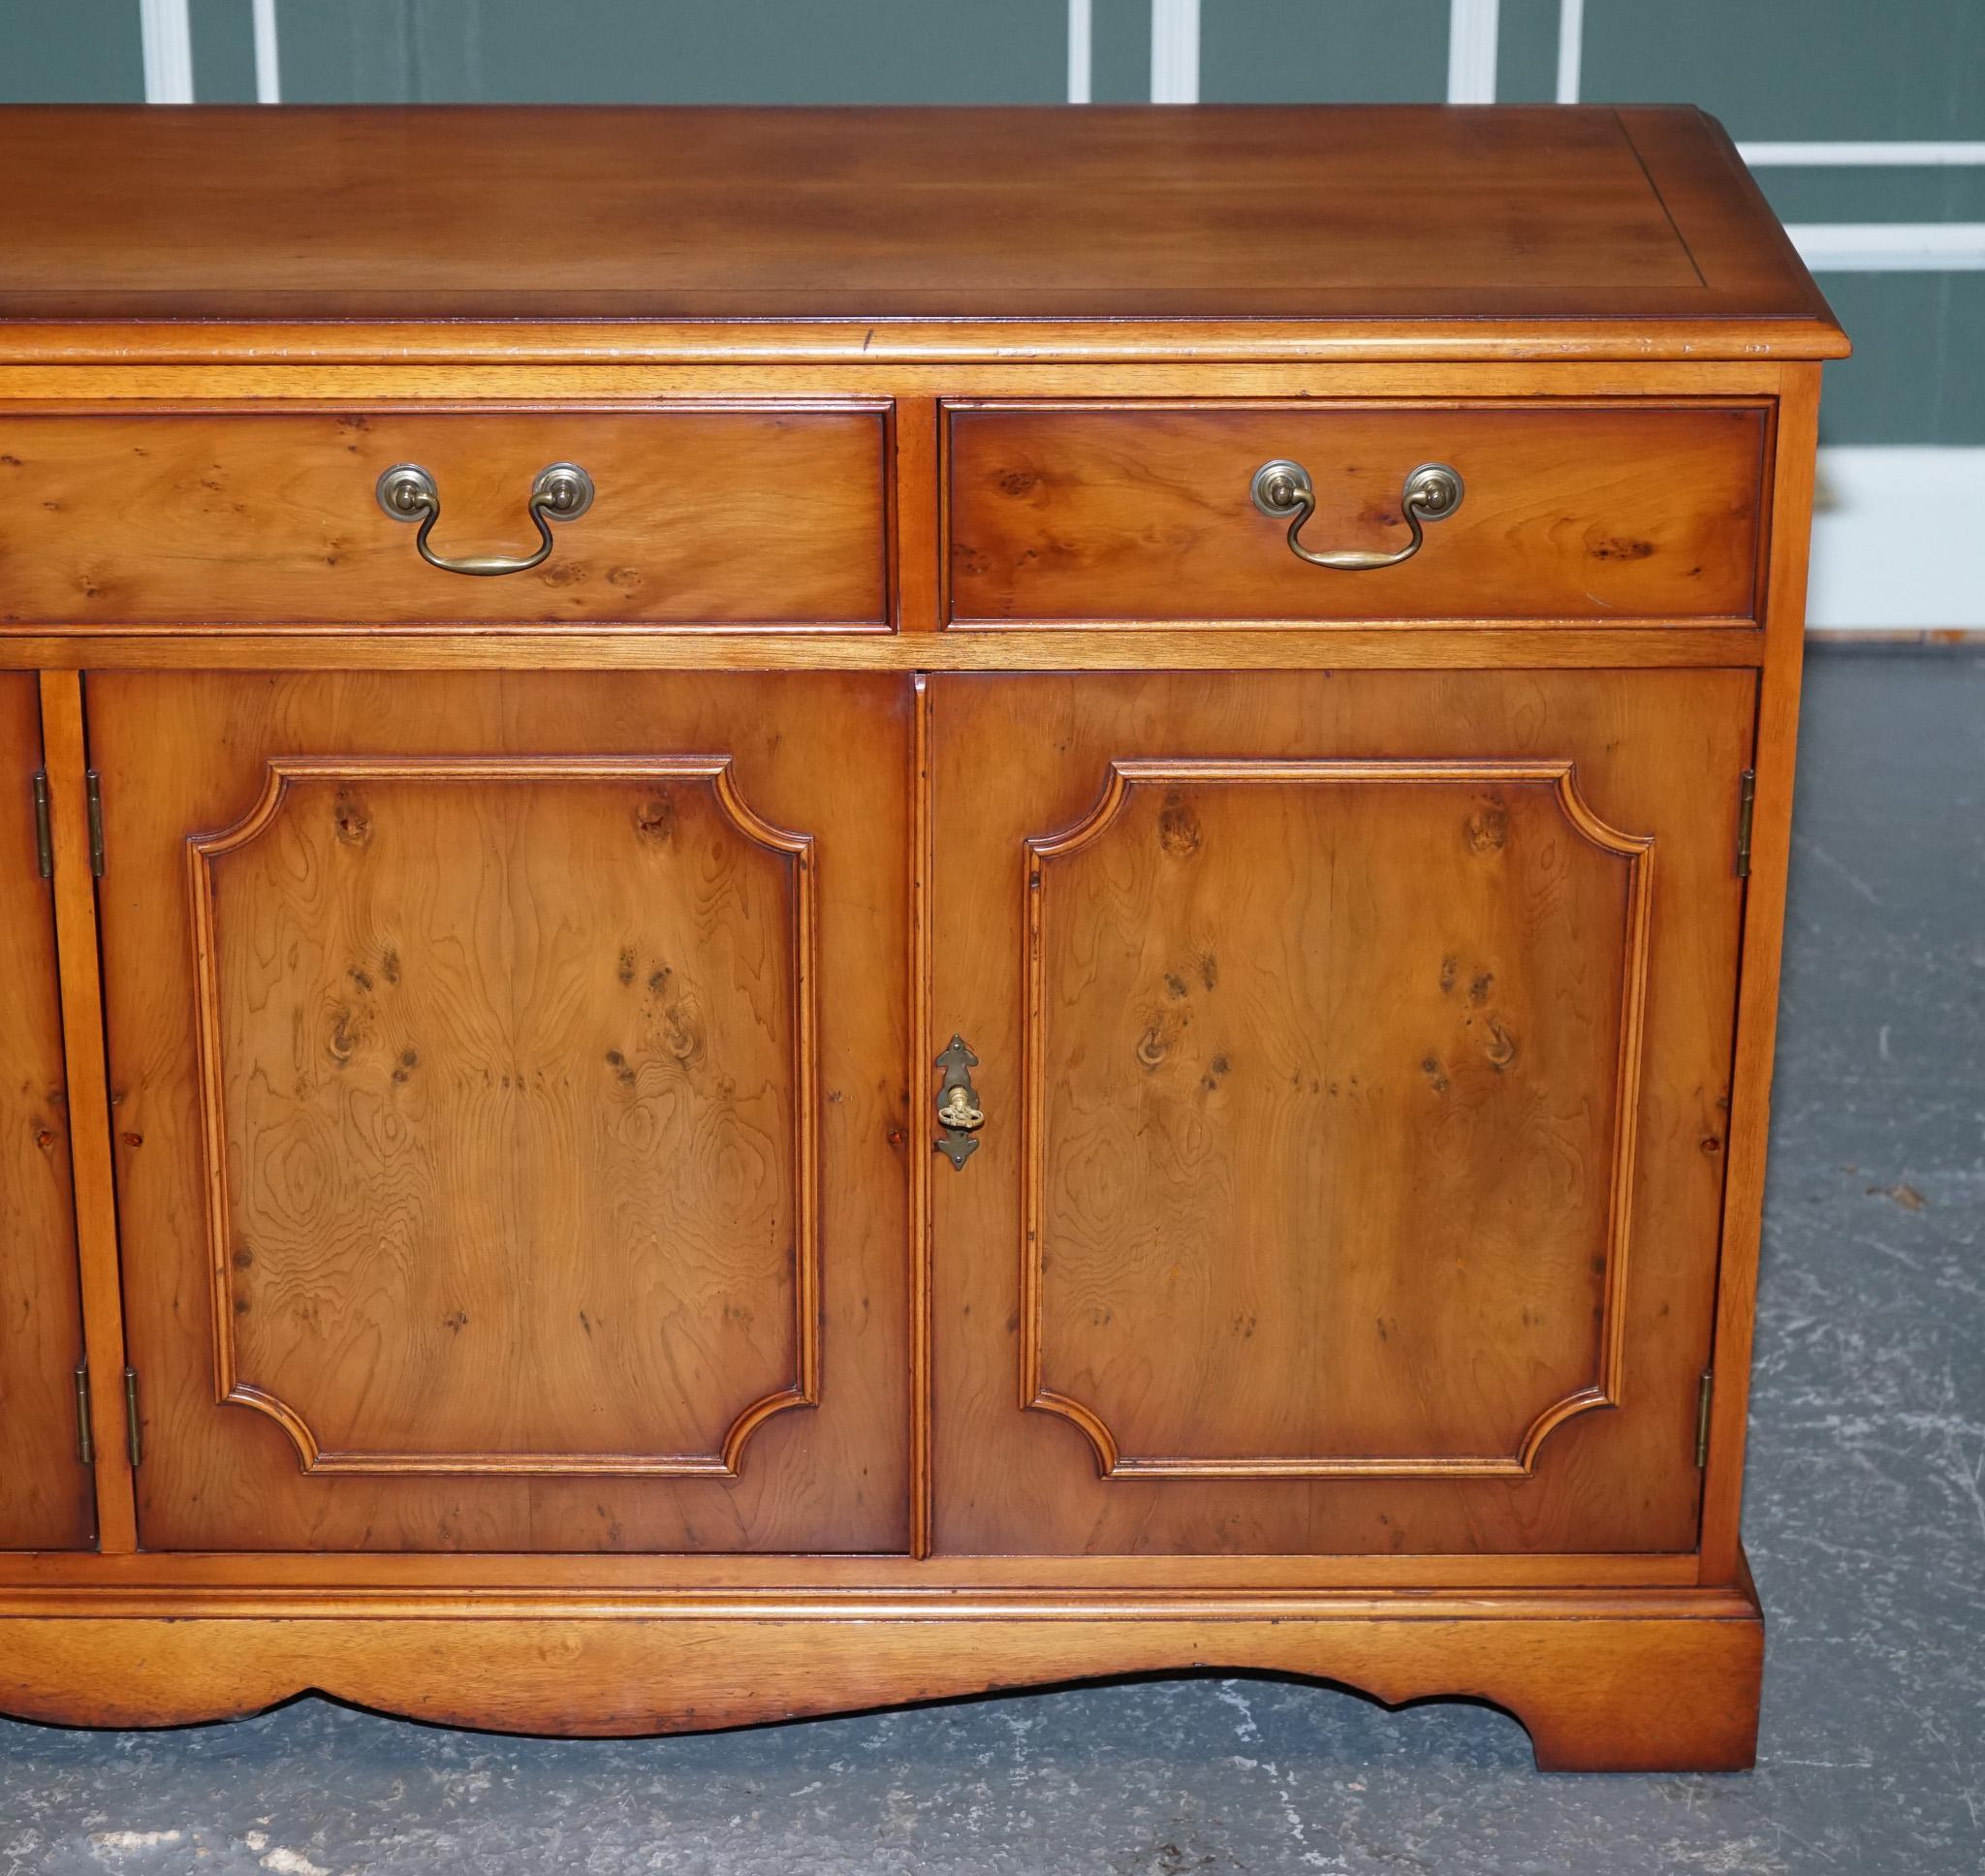 Vintage Bradley Burr Yew Wood Four Door Sideboard Cupboard In Good Condition For Sale In Pulborough, GB